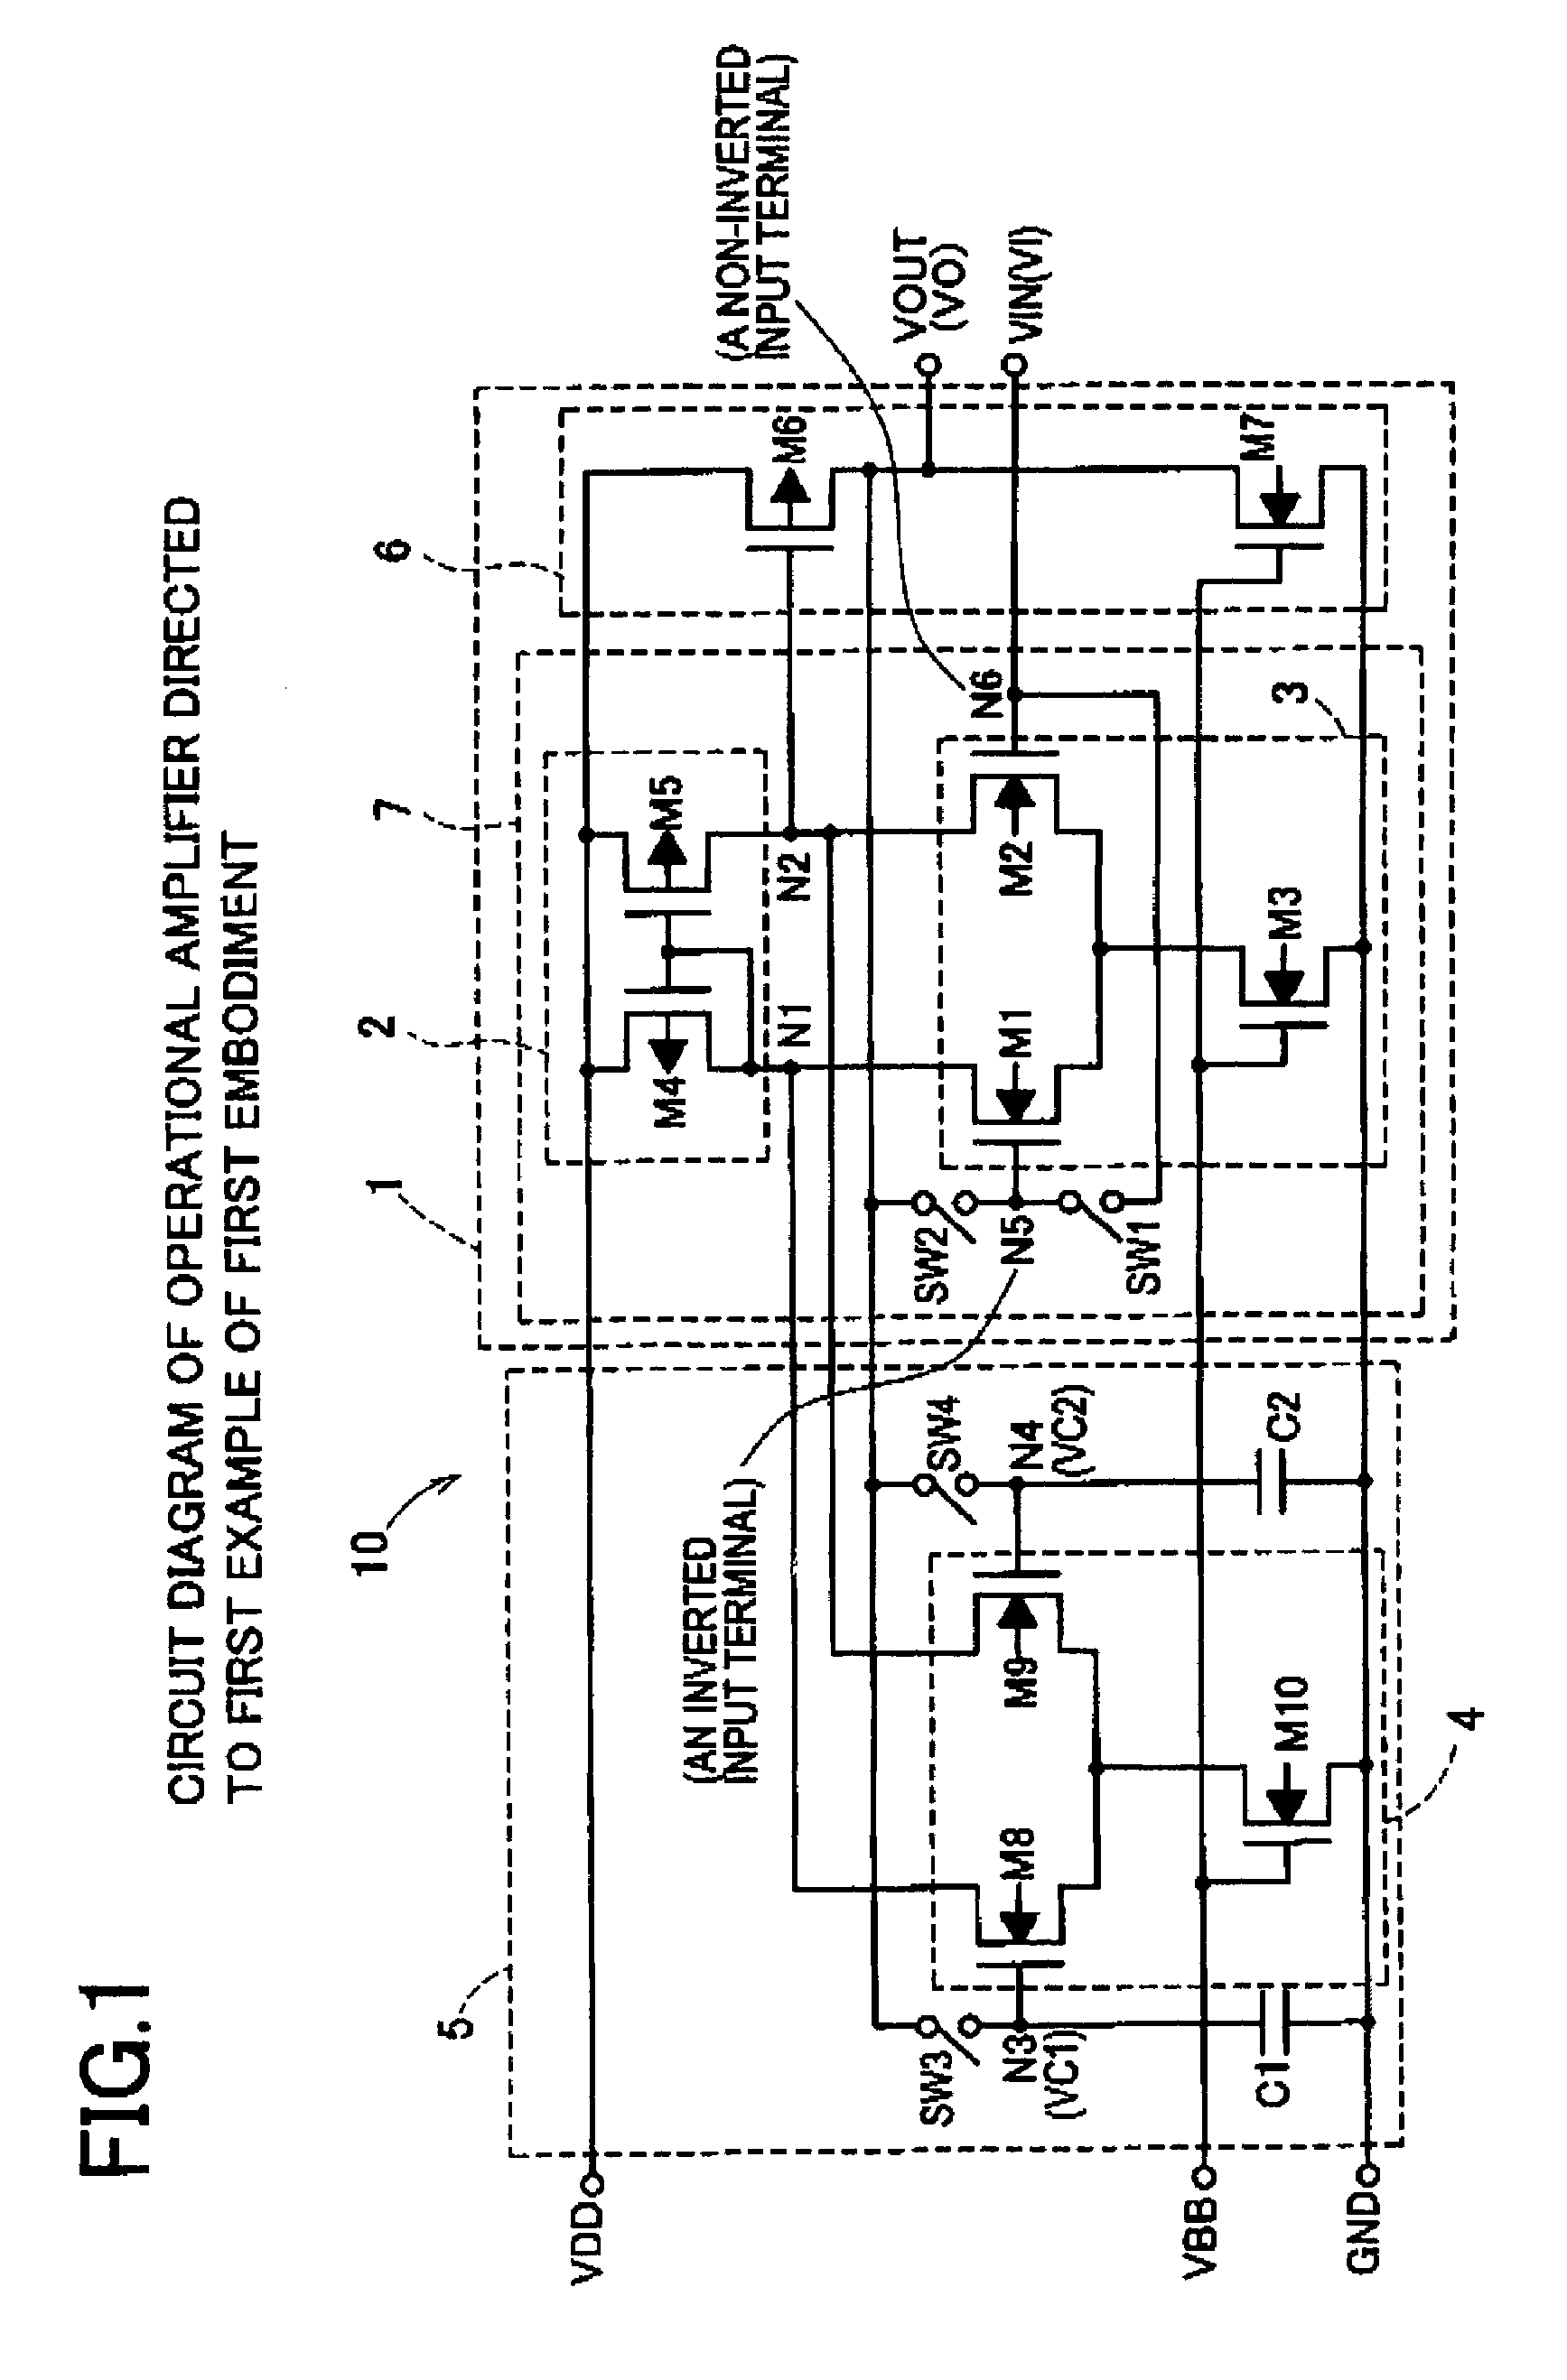 Operational amplifier, line driver, and liquid crystal display device